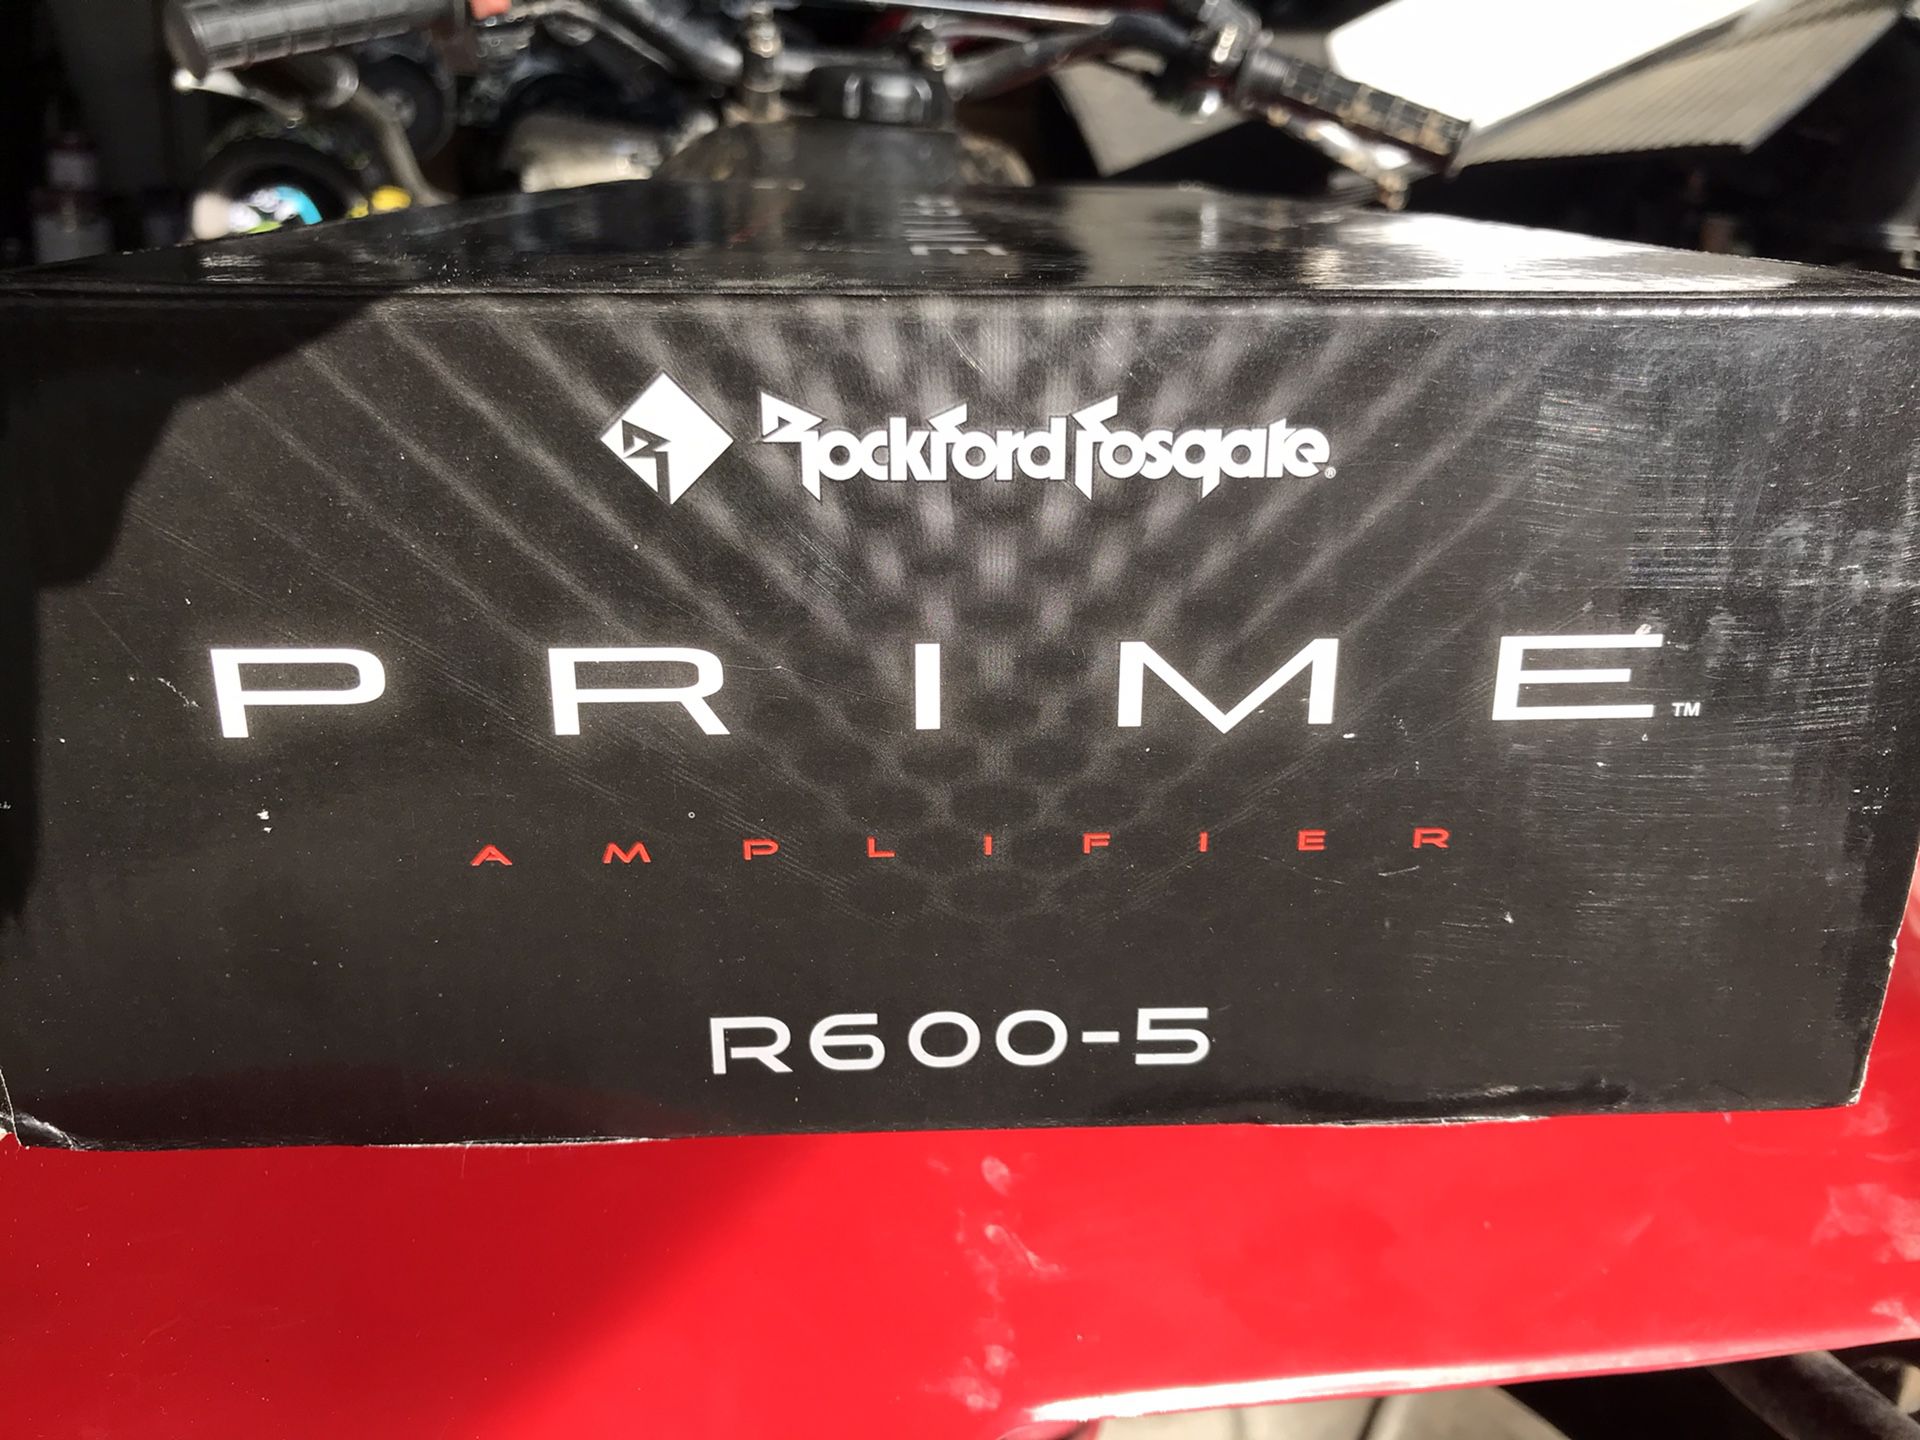 Rockford fosgate R600-5 Amplifier for Sale in Lakeview, CA - OfferUp